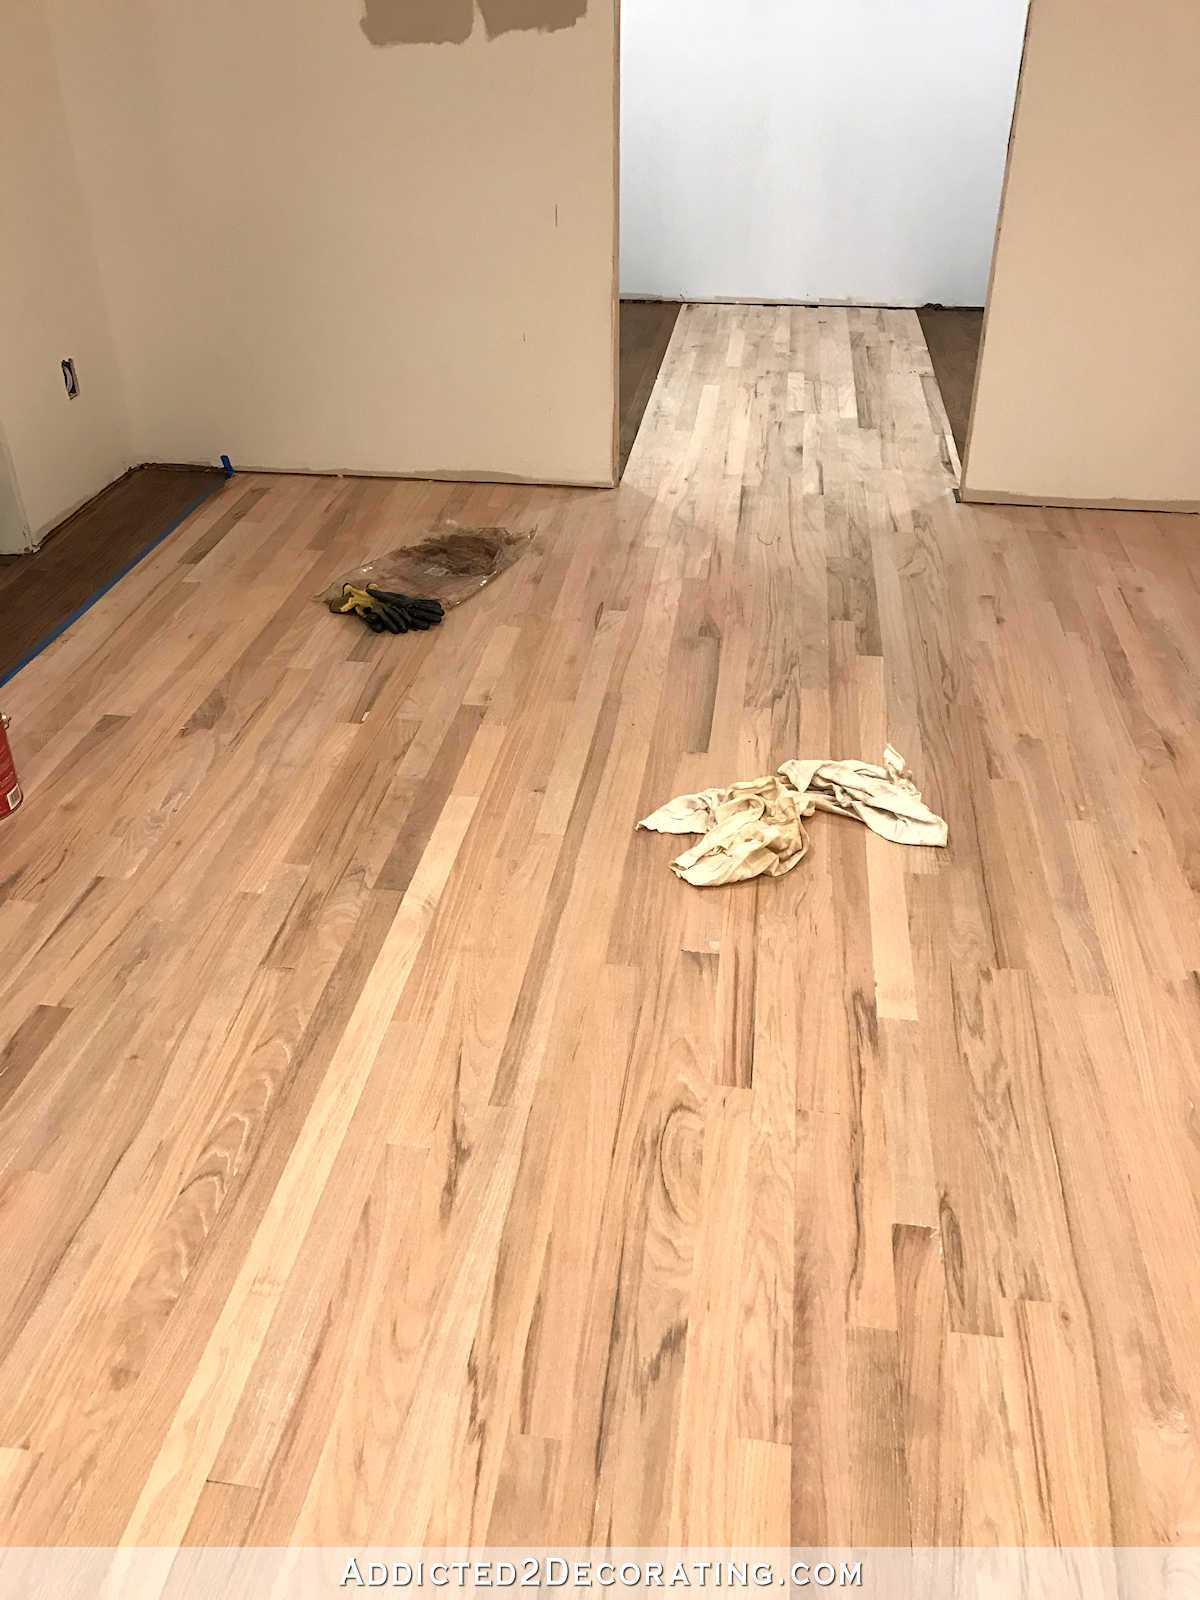 25 Nice How Much Does Restaining Hardwood Floors Cost 2022 free download how much does restaining hardwood floors cost of adventures in staining my red oak hardwood floors products process with regard to staining red oak hardwood floors 12 breakfast room and cent